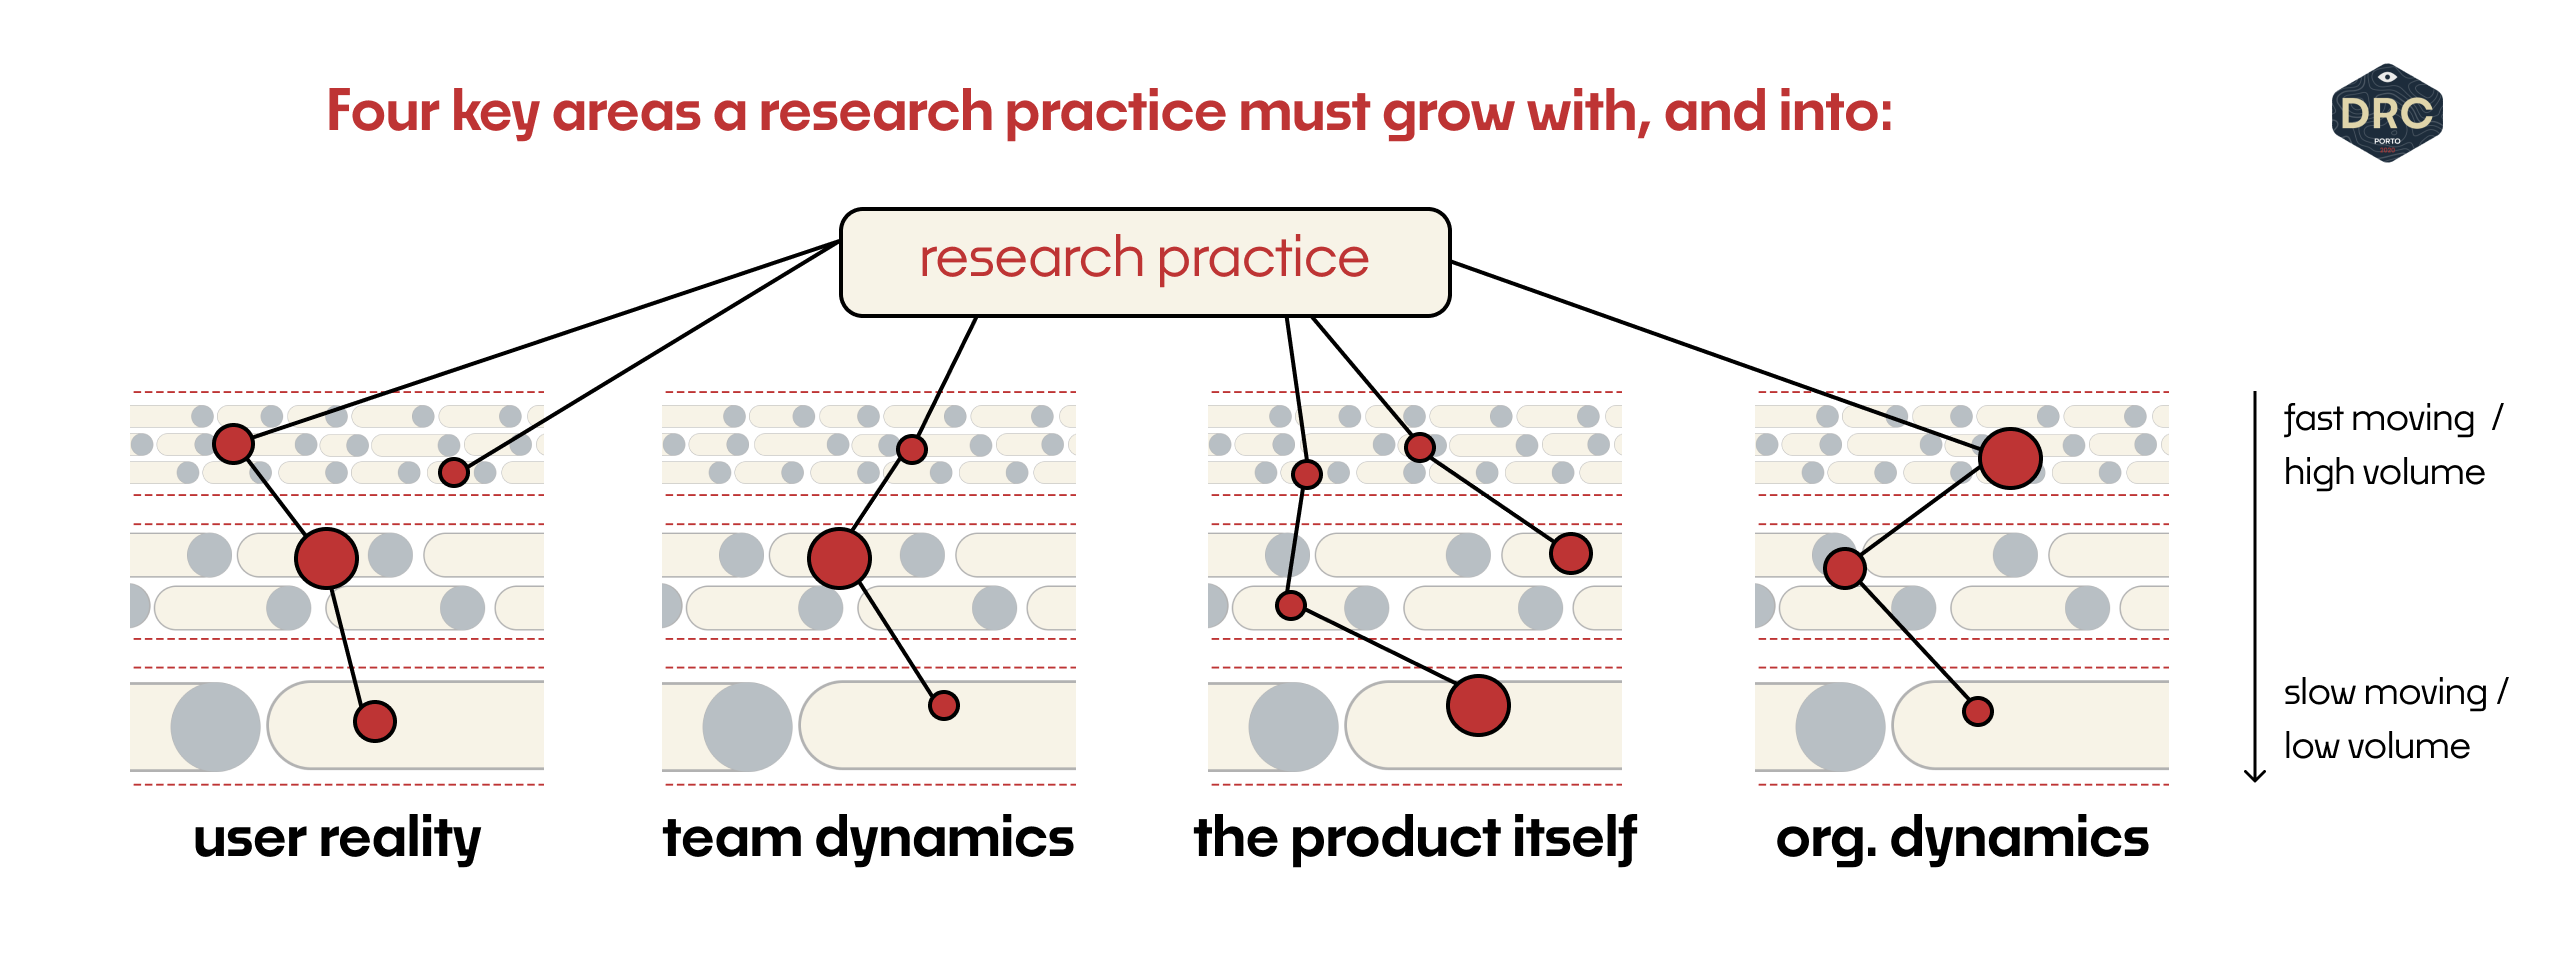 A diagram that shows a research practice extending graphical roots into four areas: user reality, team dynamics, the product itself, and organizational dynamics.